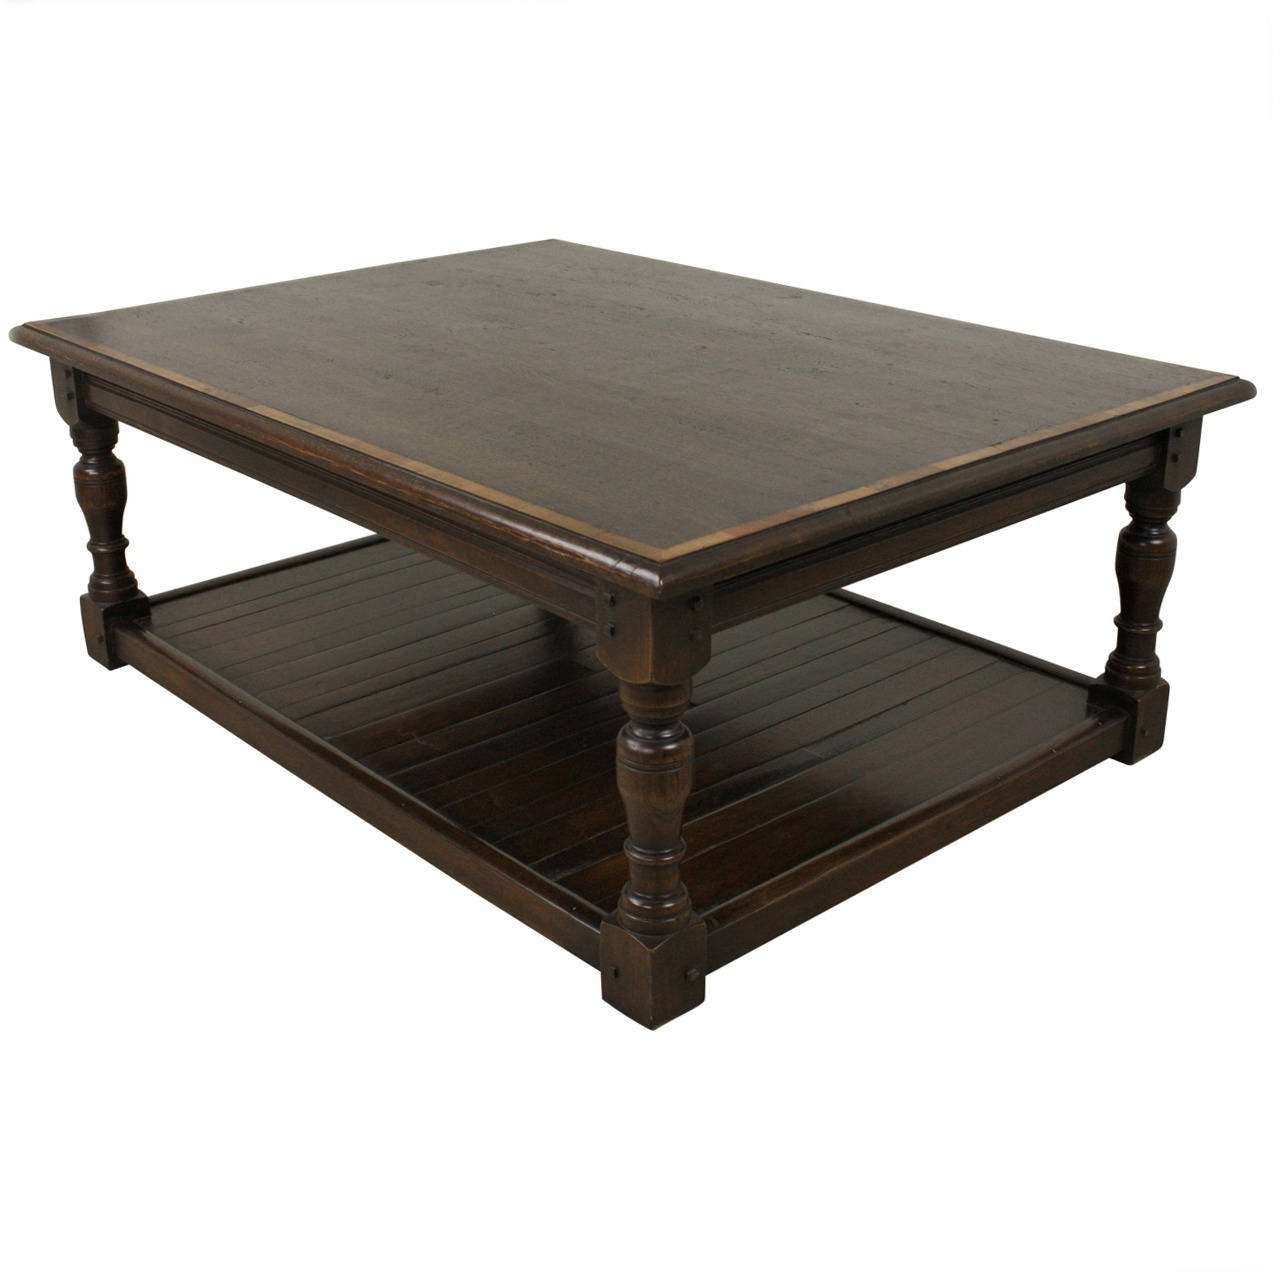 Dark Oak English Potboard Coffee Table For Sale At 1stdibs Intended For Current Dark Oak Coffee Tables (View 1 of 20)